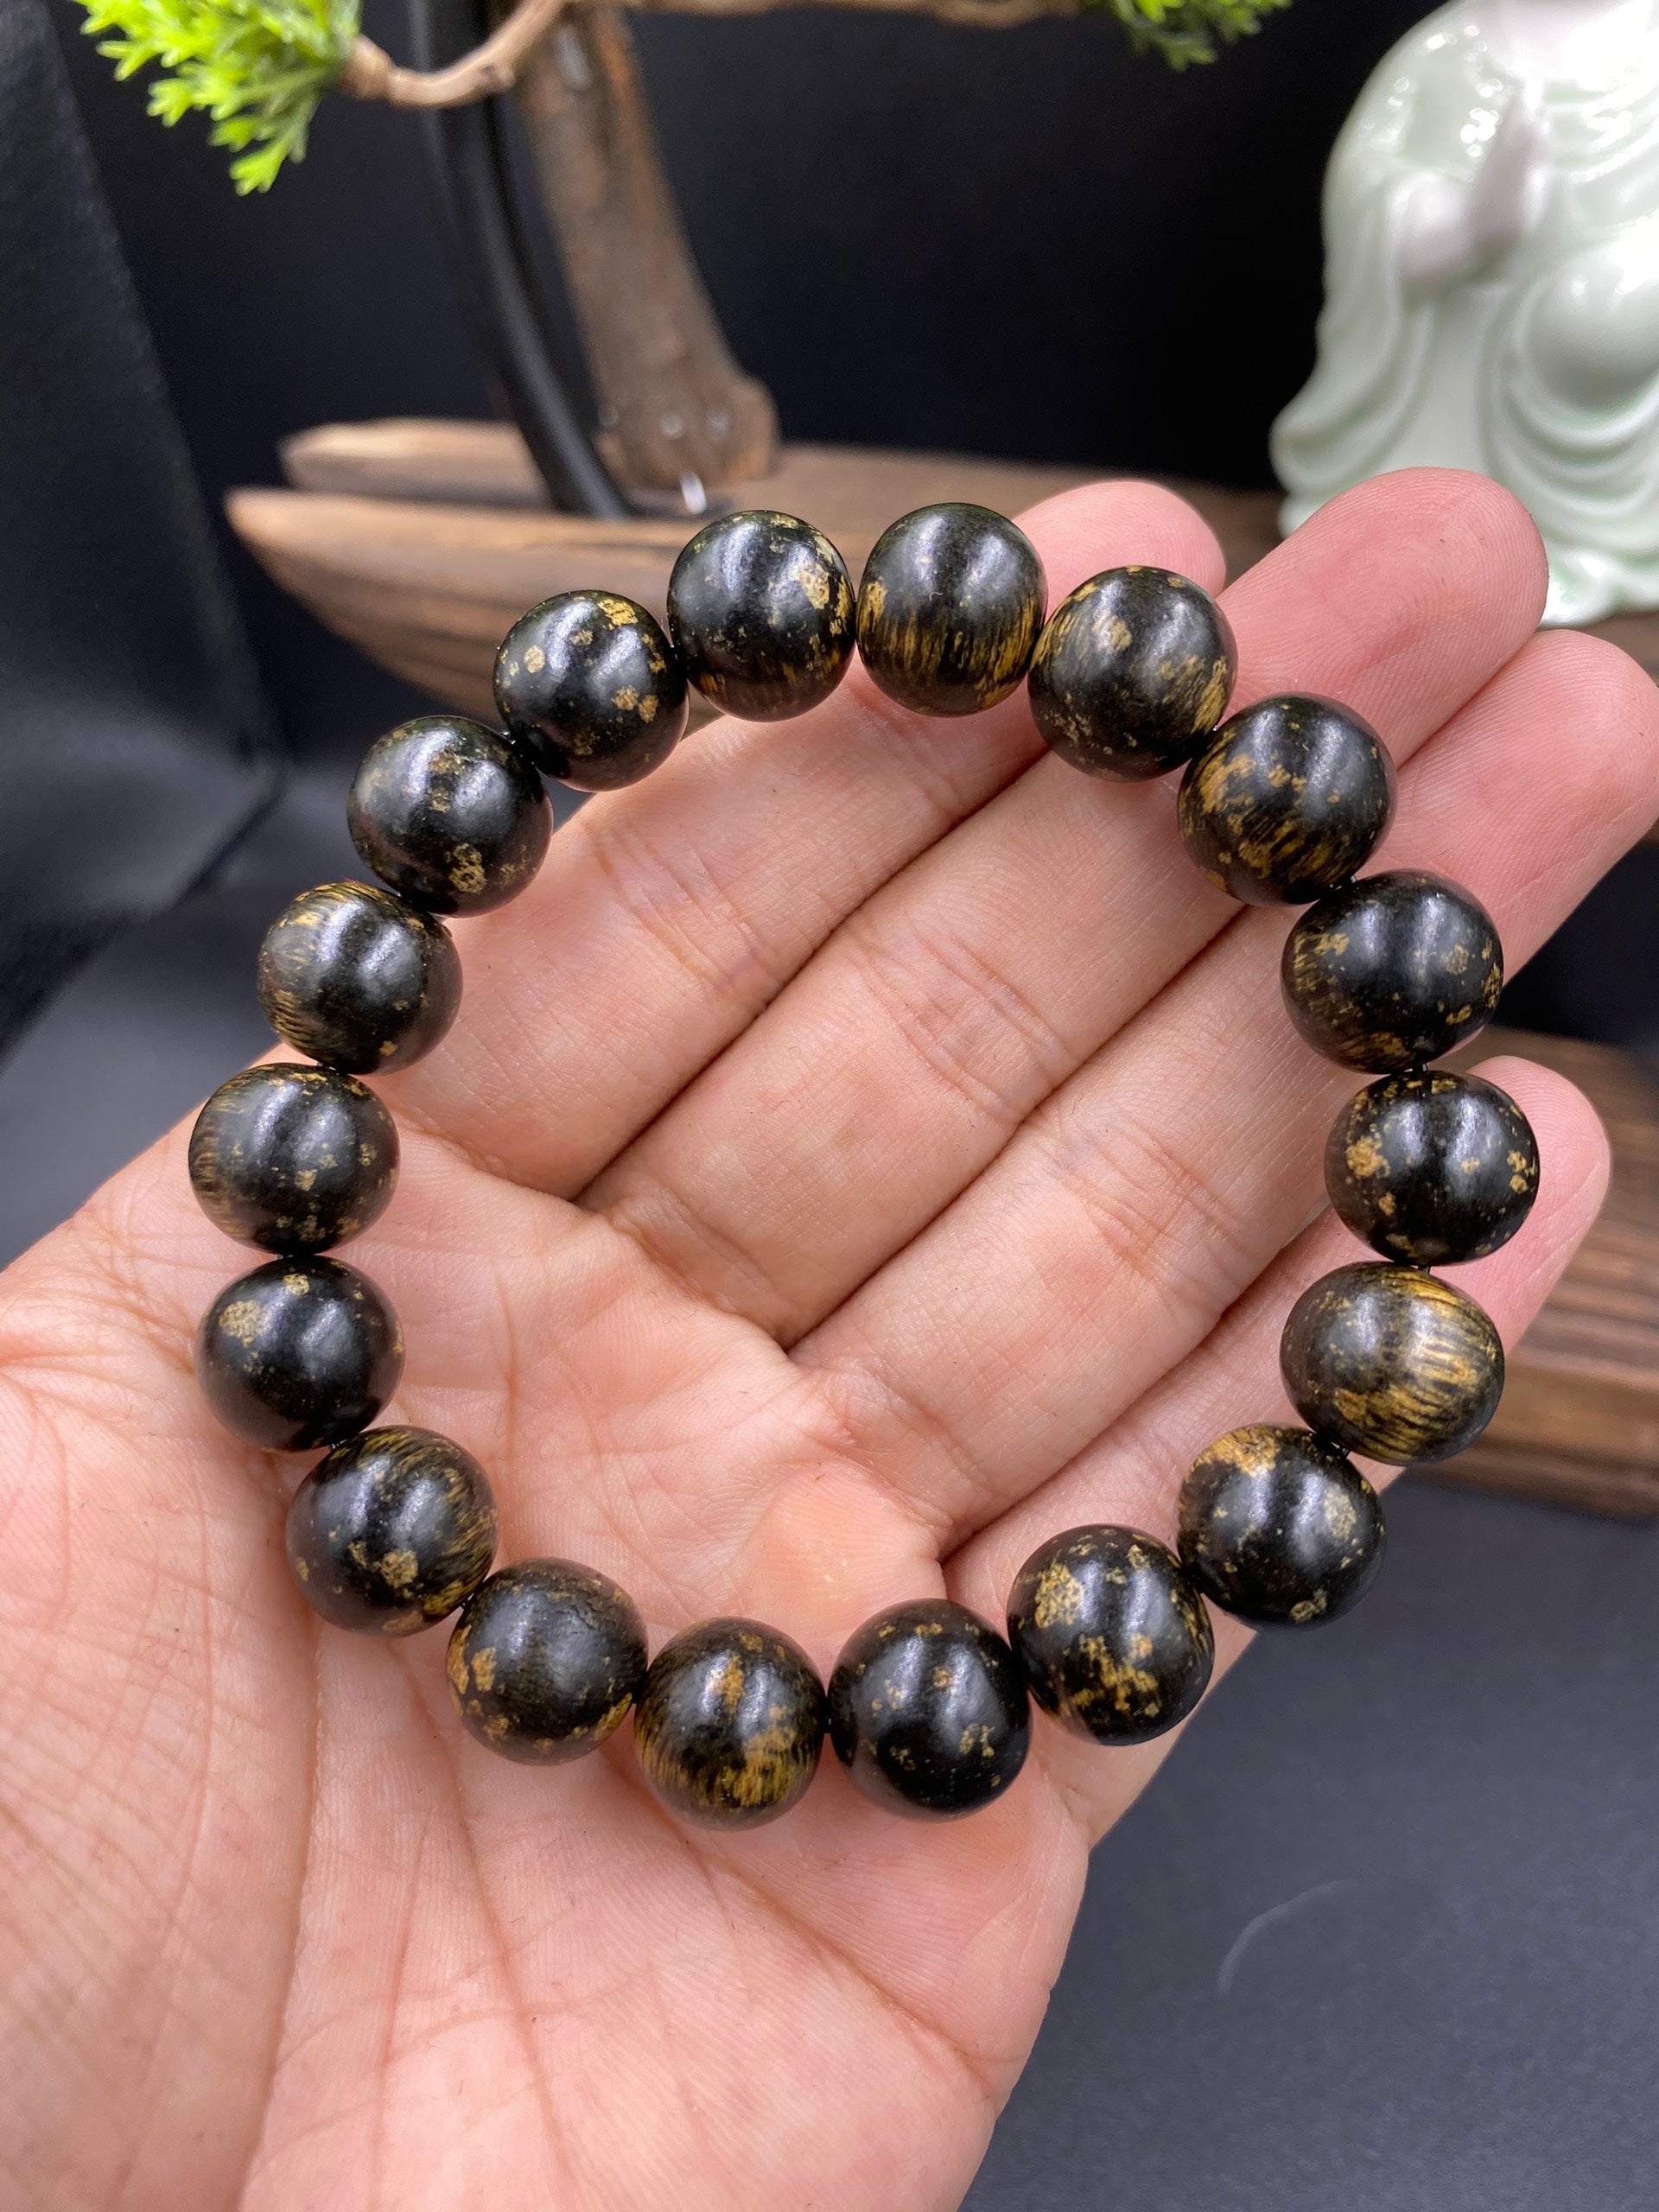 Natural Old Wild Malaysia Agarwood Bracelet (Sinking Type)  天然老野生马来西亚沉香手链24.63g 19cm 14.2mm 16 Beads, Men's Fashion, Watches &  Accessories, Jewelry on Carousell